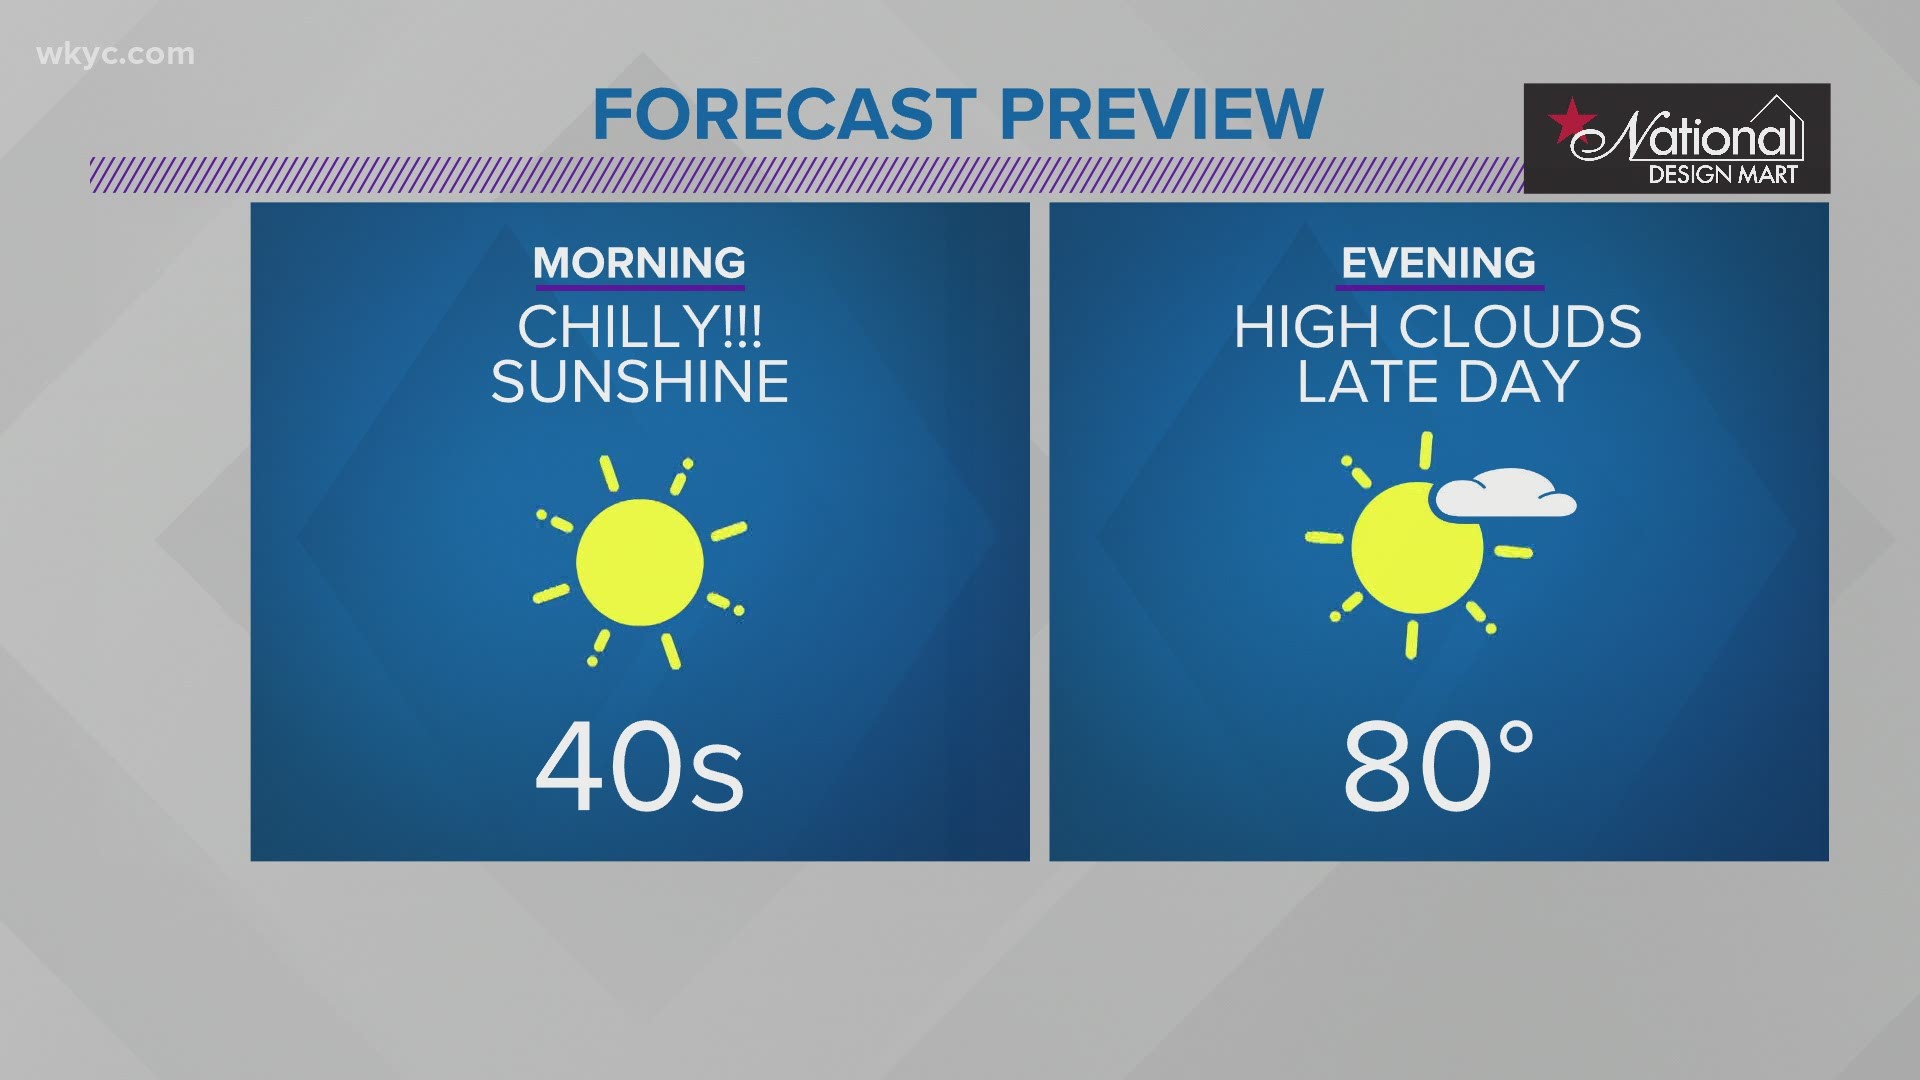 The weather will remain calm, sunny, and a bit cool through Thursday.